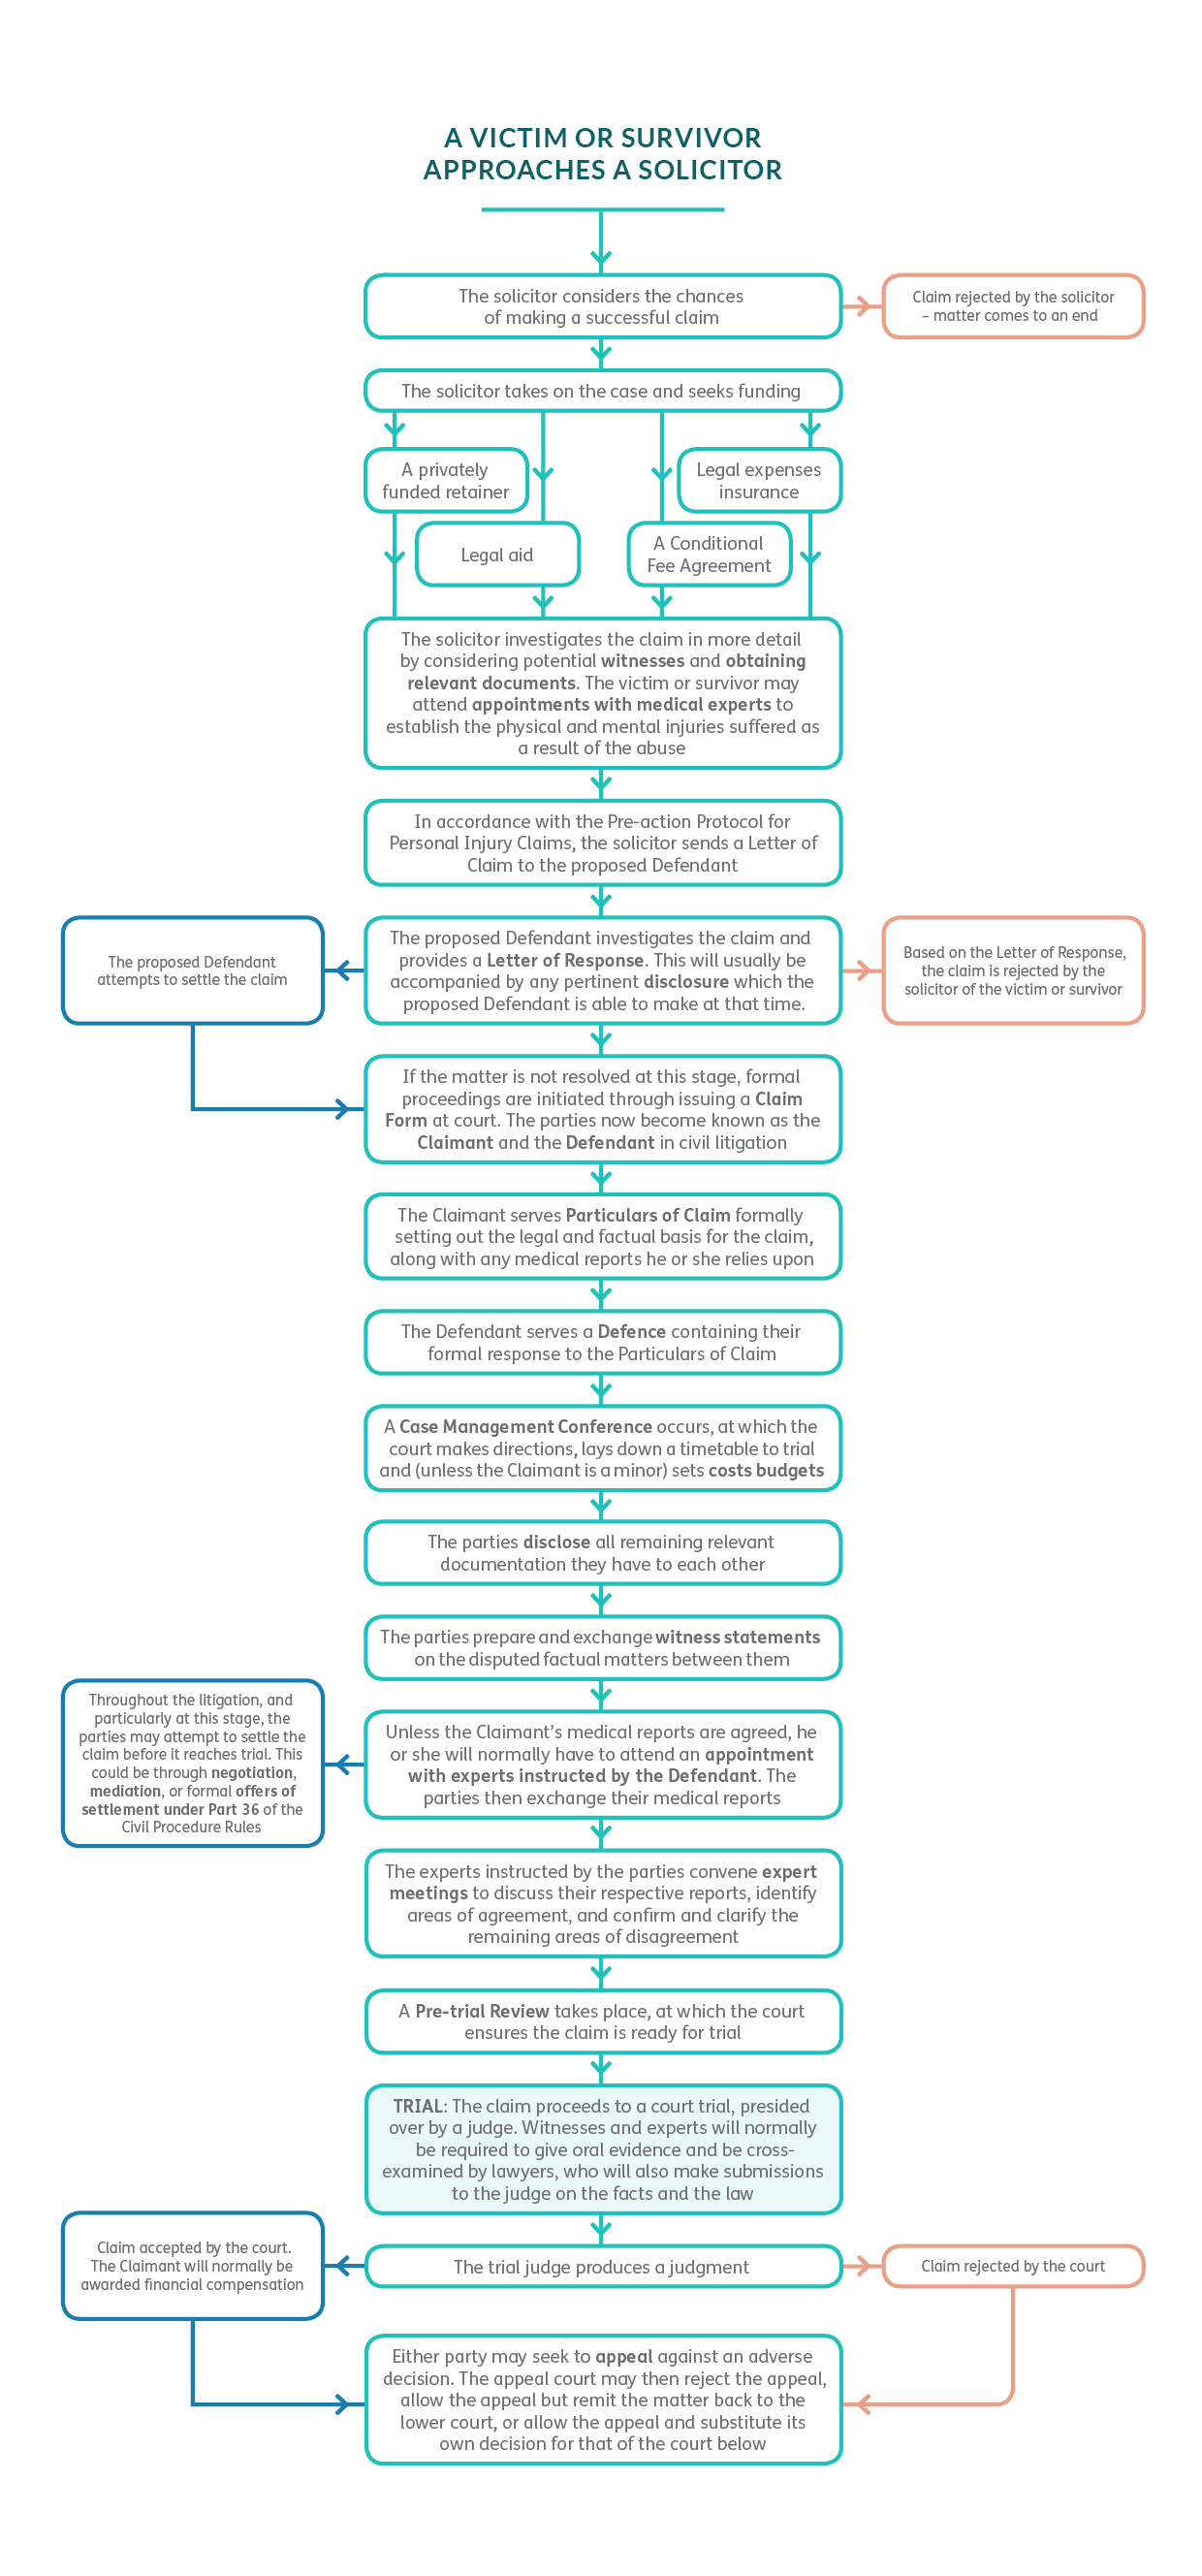 A flow diagram of the overview of the litigation process for the victims and survivors